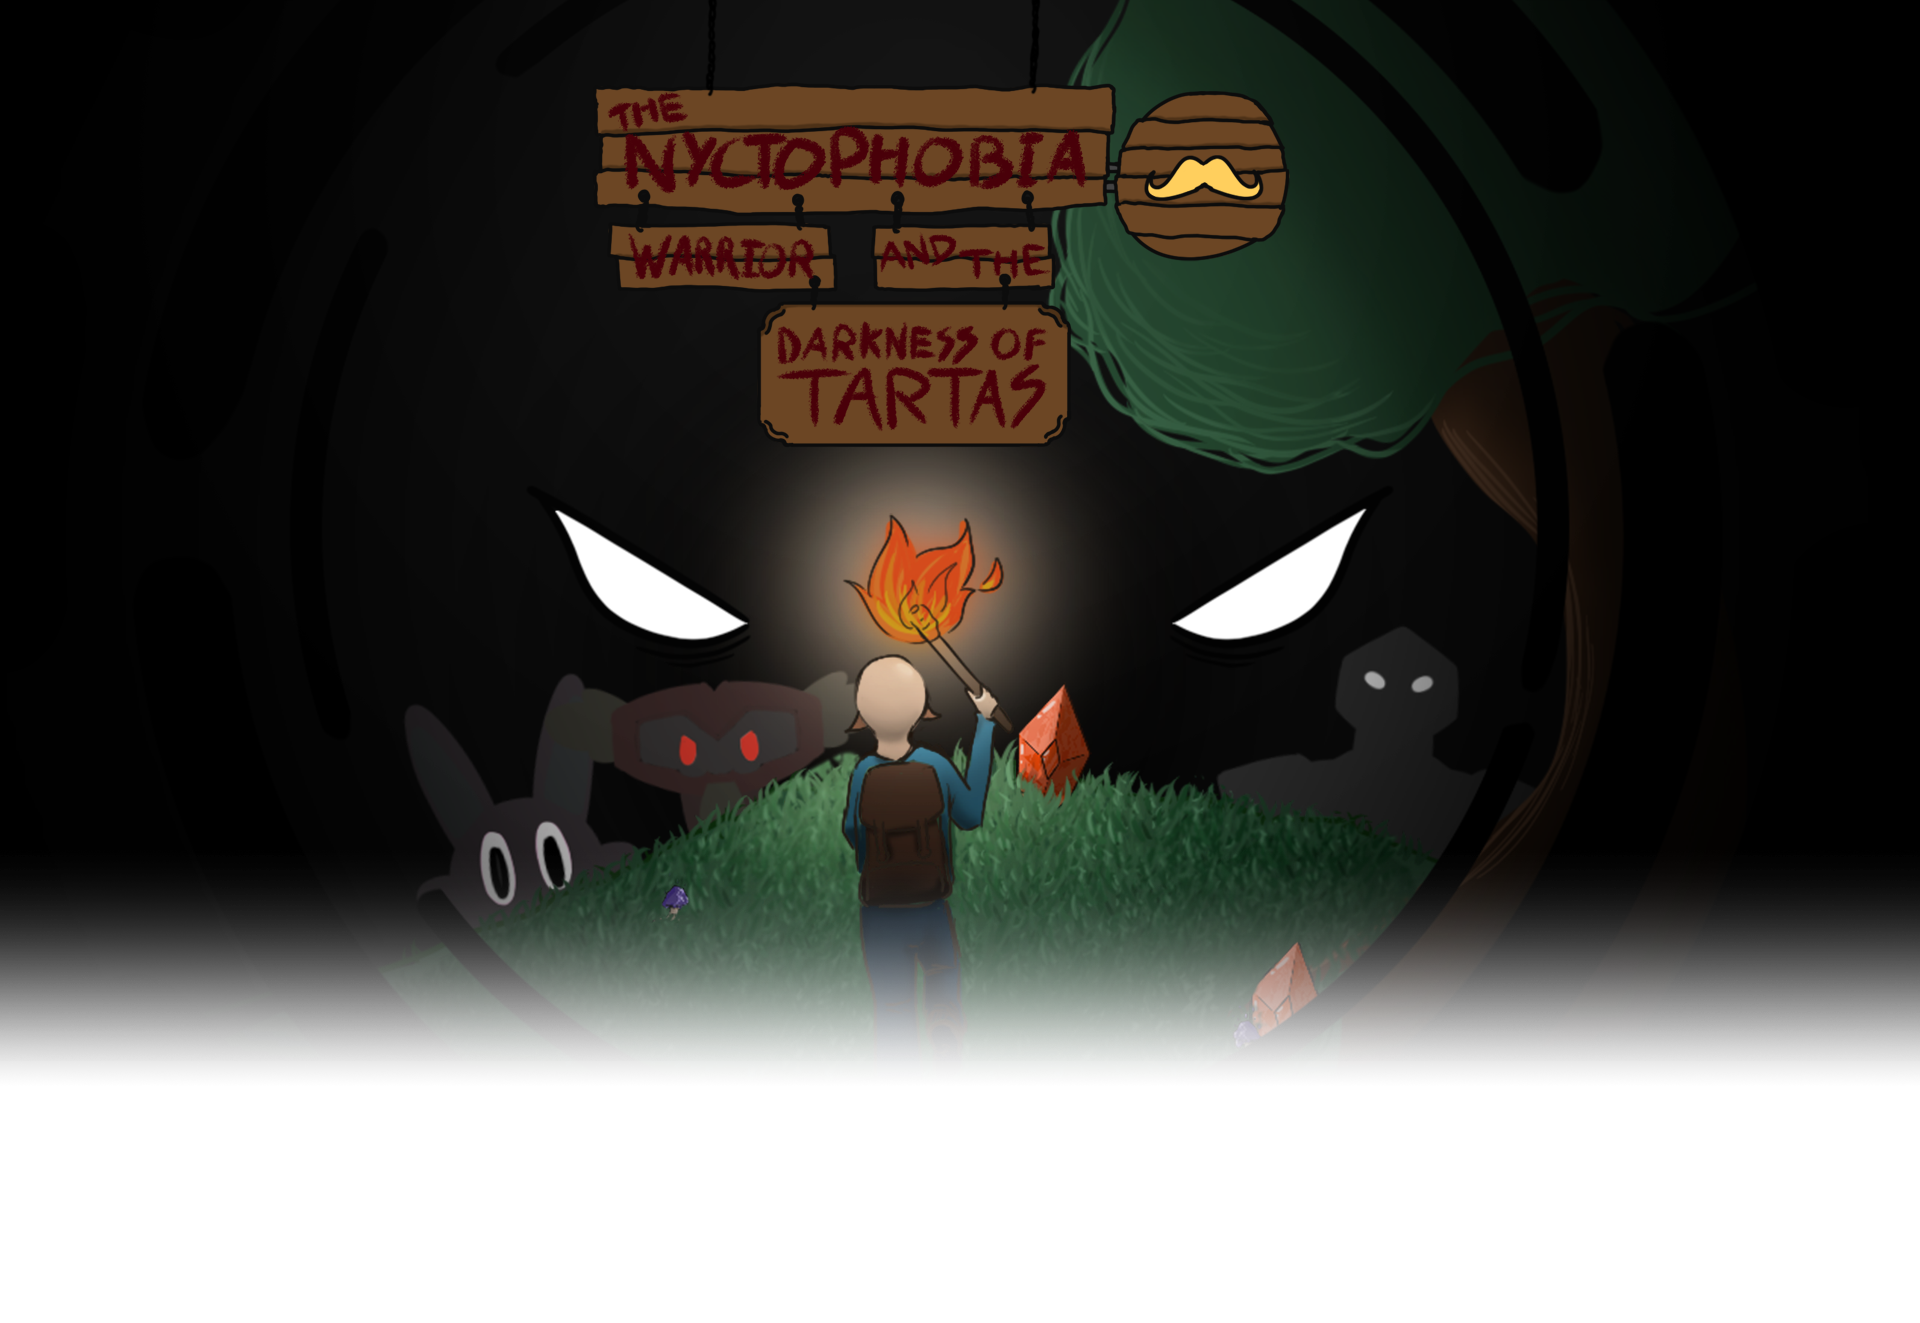 The nyctophobia mustached warrior and the darkness of Tartas